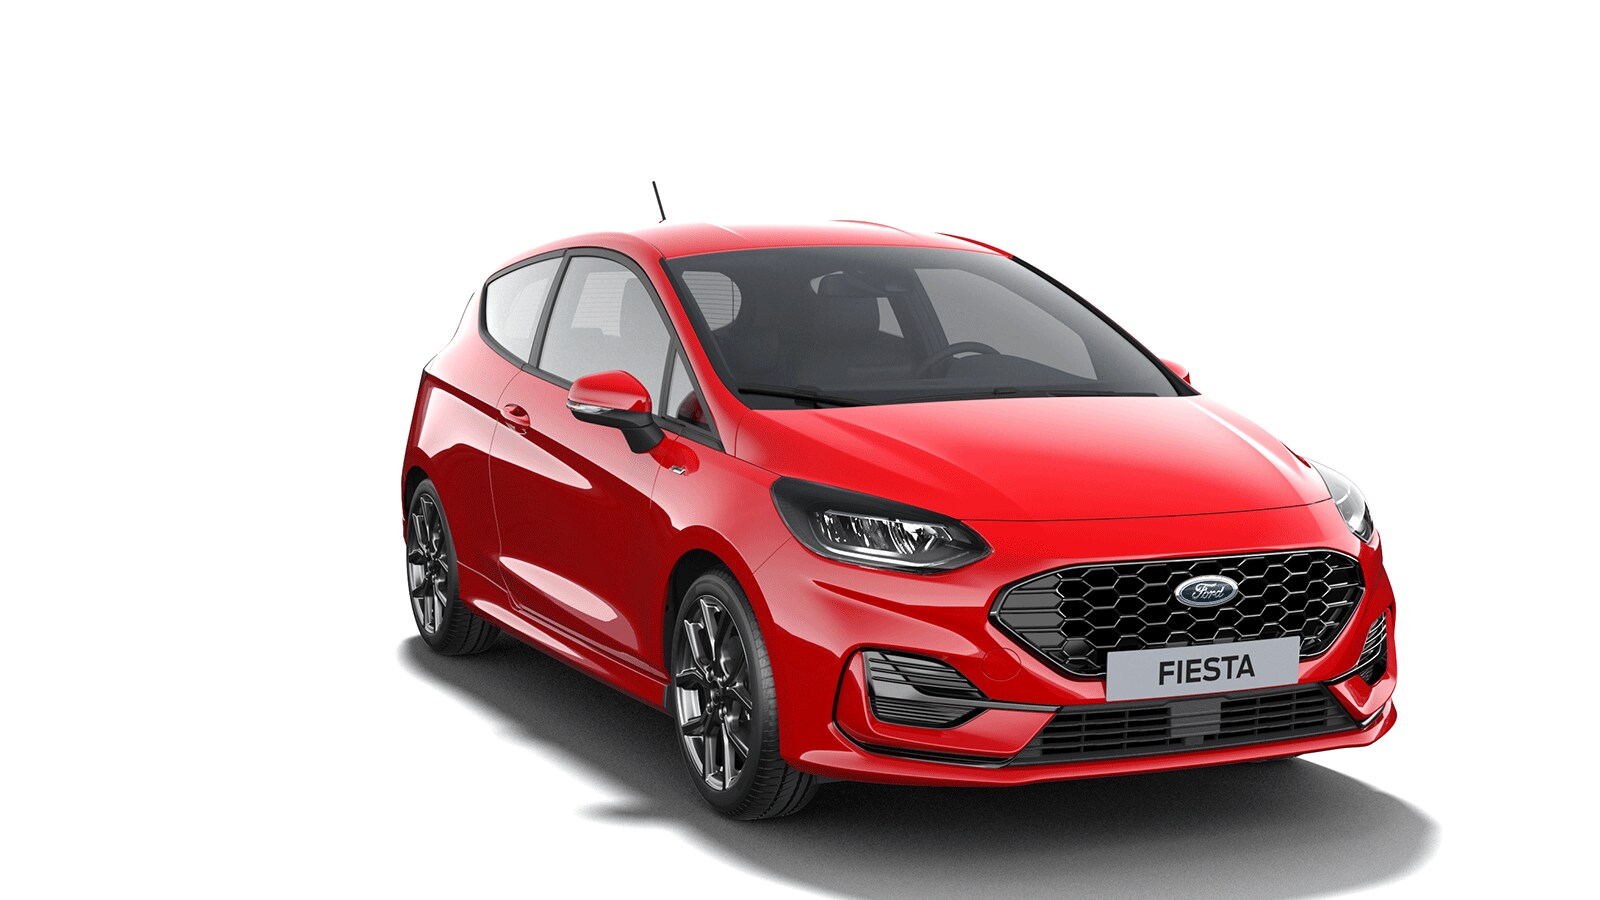 Ford Fiesta ST-Line from 3/4 front angle